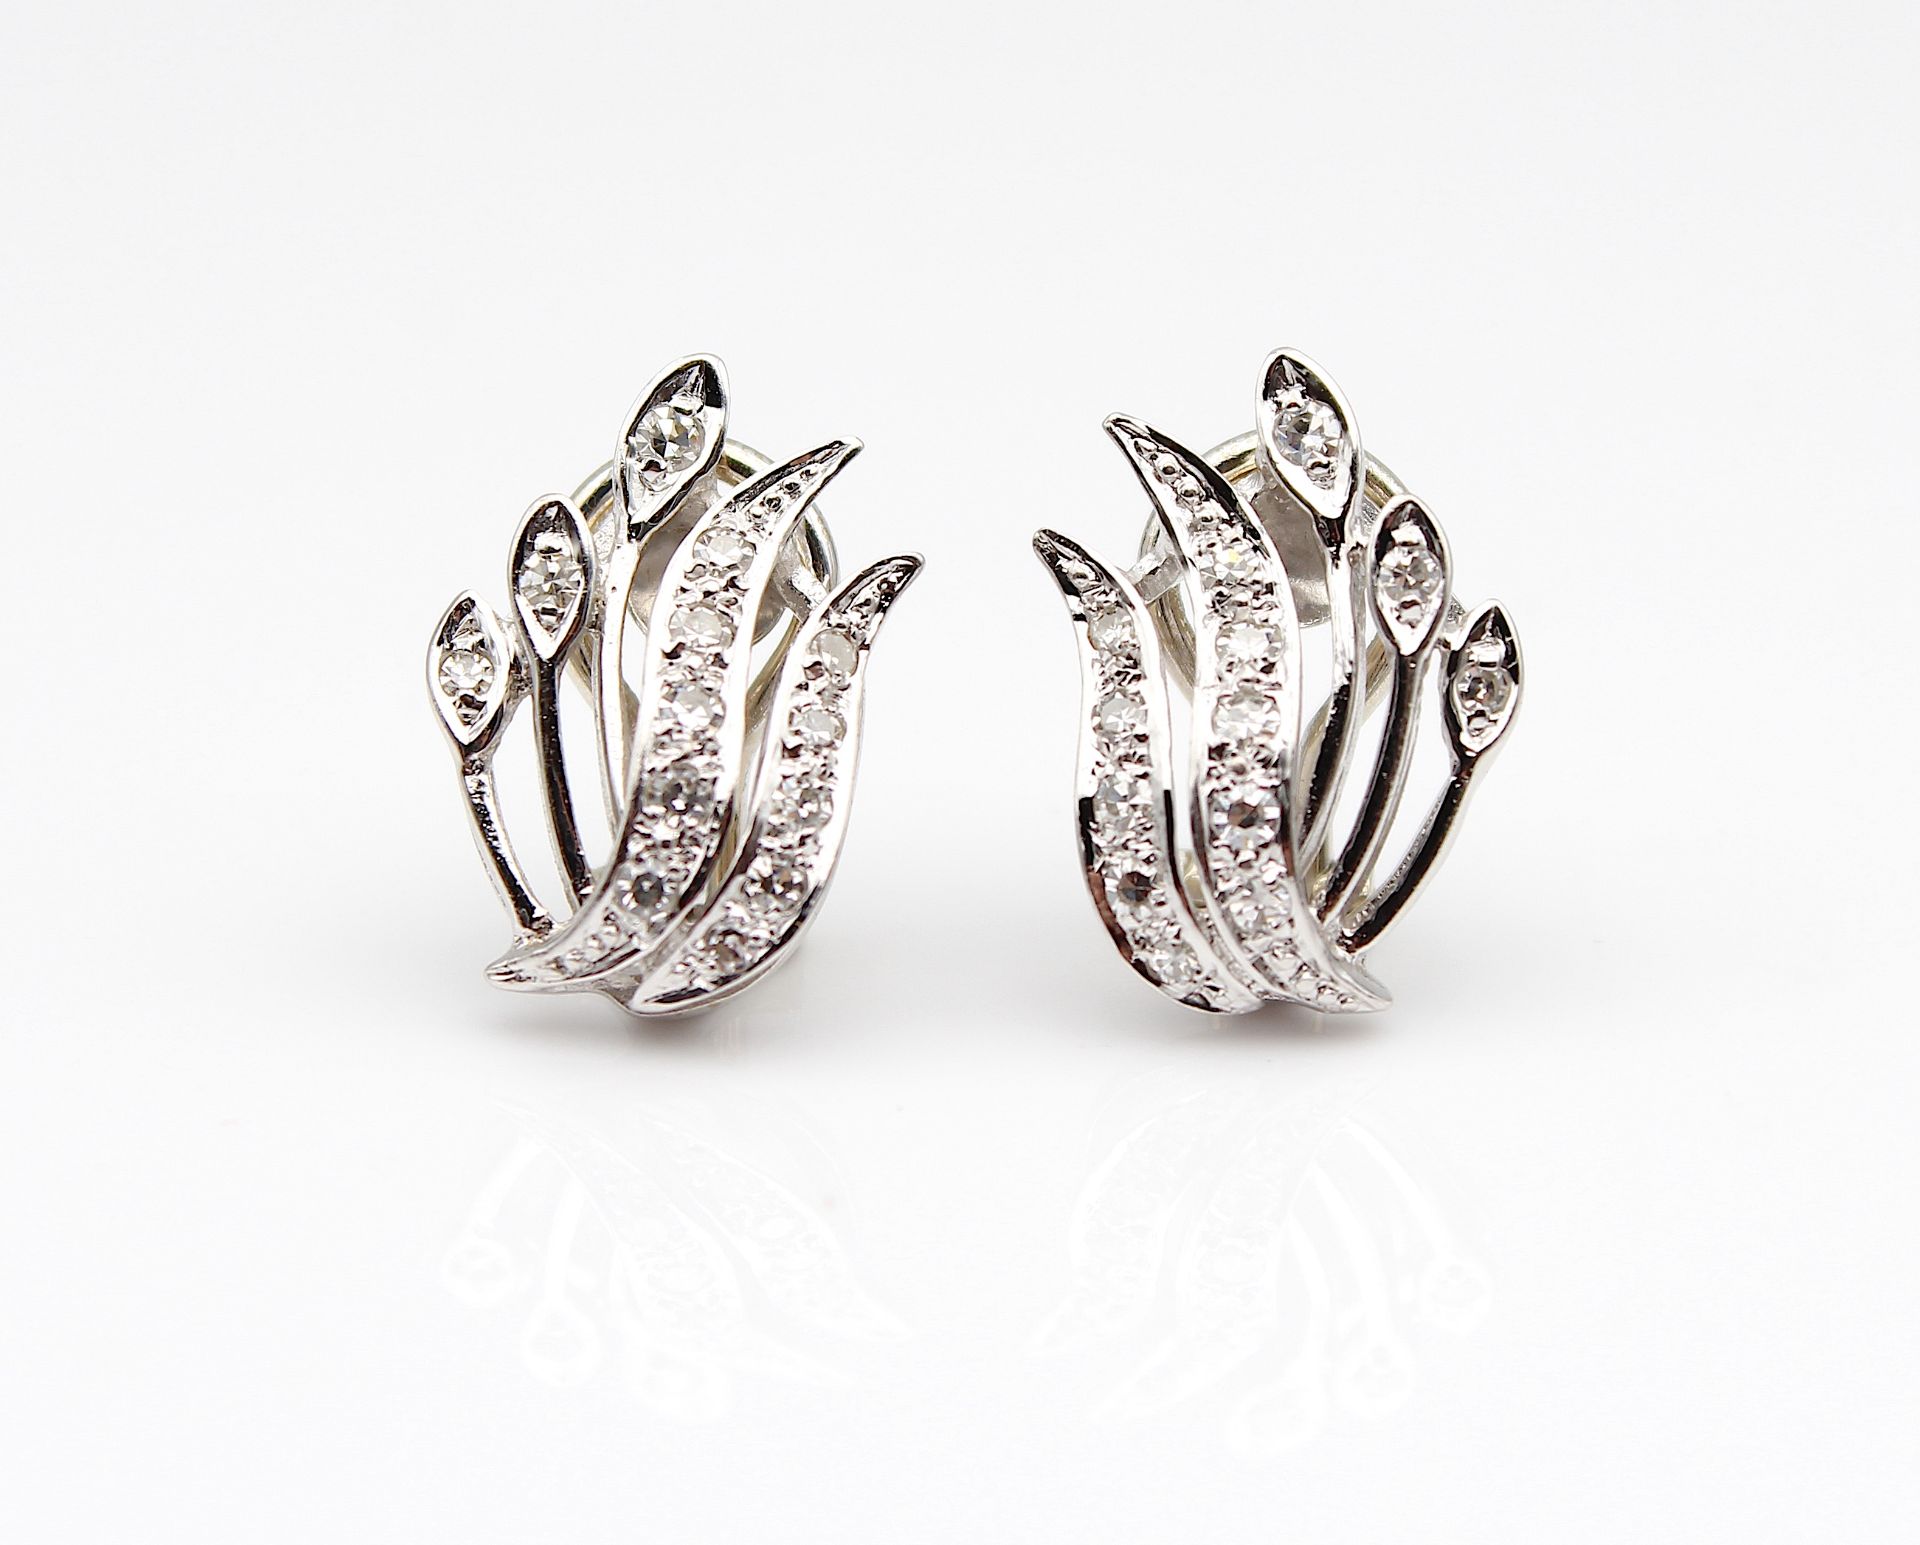 Pretty pair of ear clips with diamonds